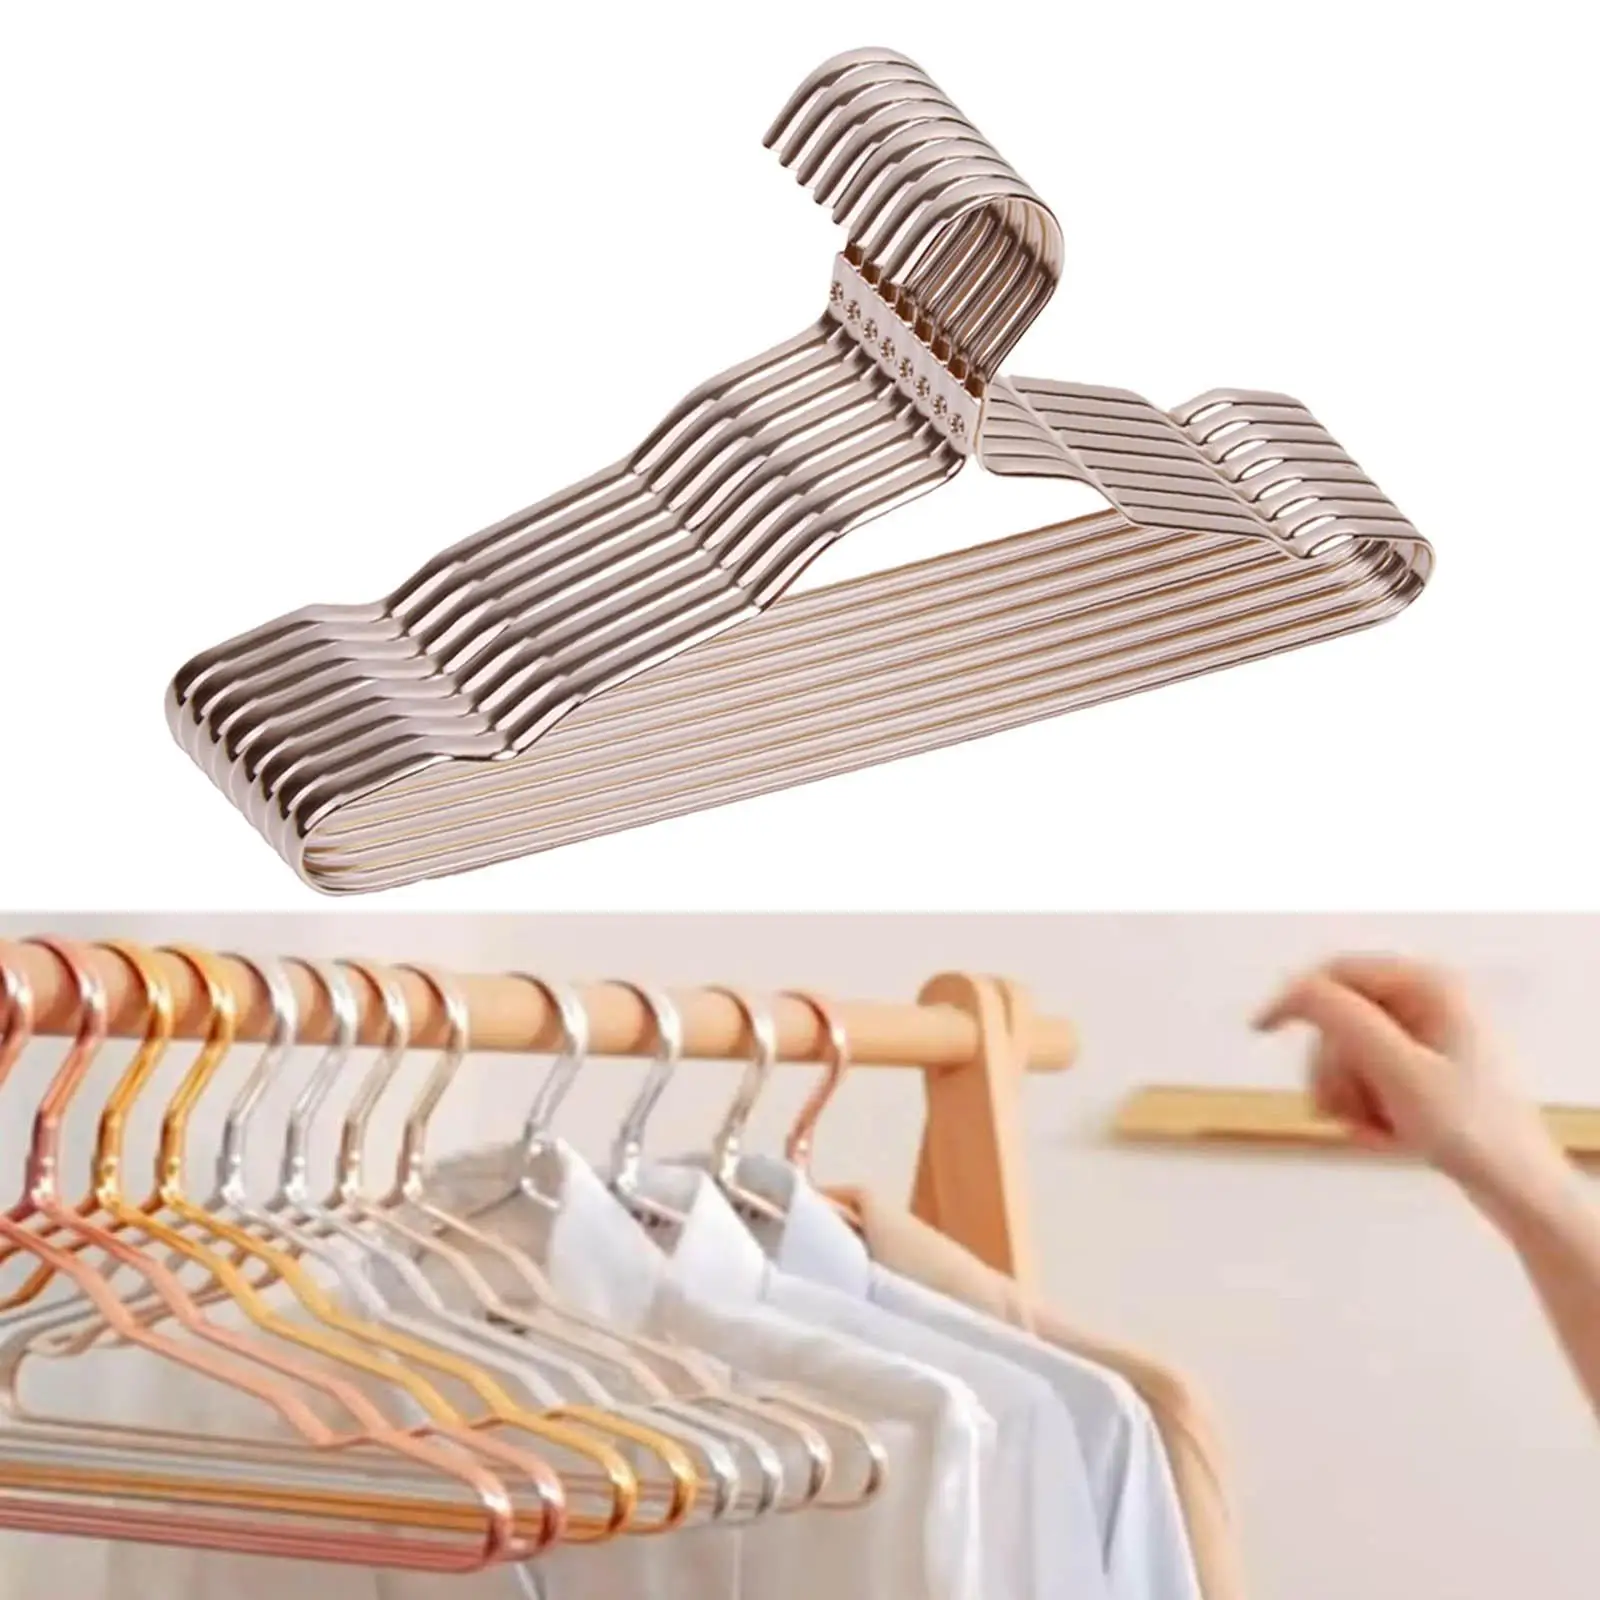 10x Clothes Hanger Seamless Drying Rack for Everyday Use Nursery Laundry